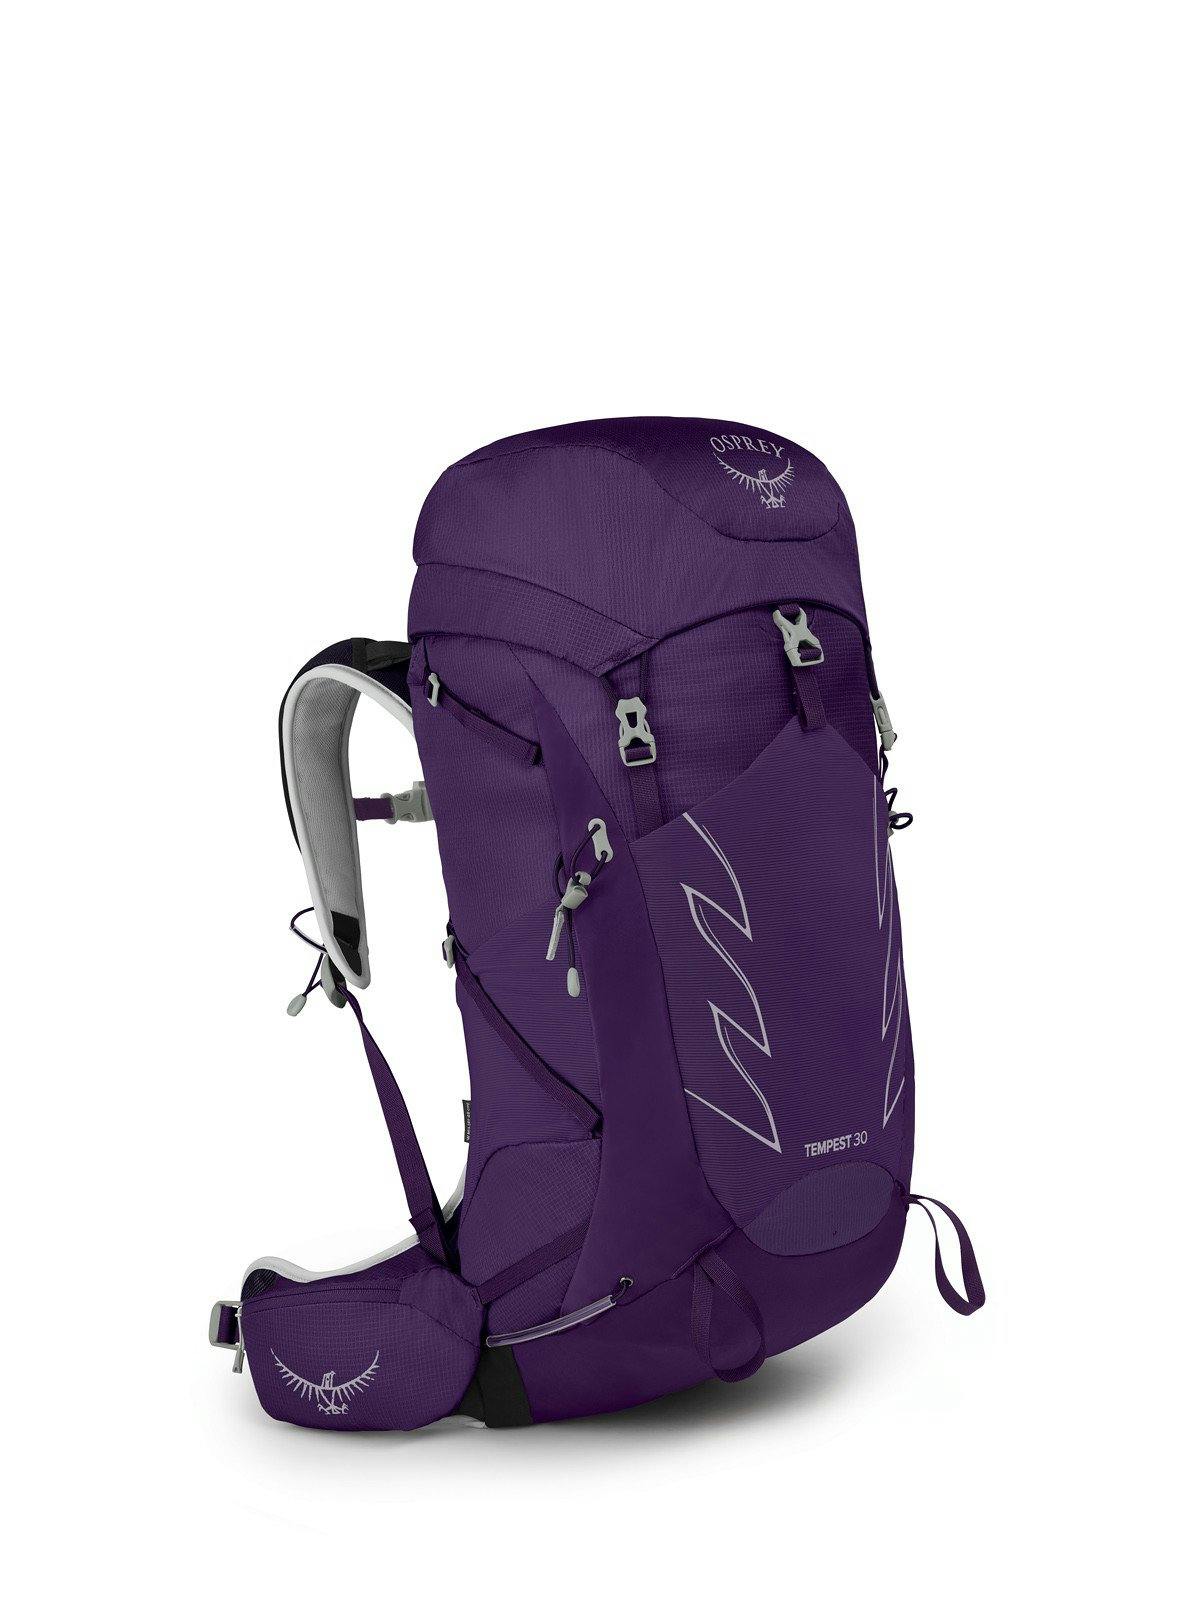 Osprey Tempest 30 Backpack- Women's · Violac Purple